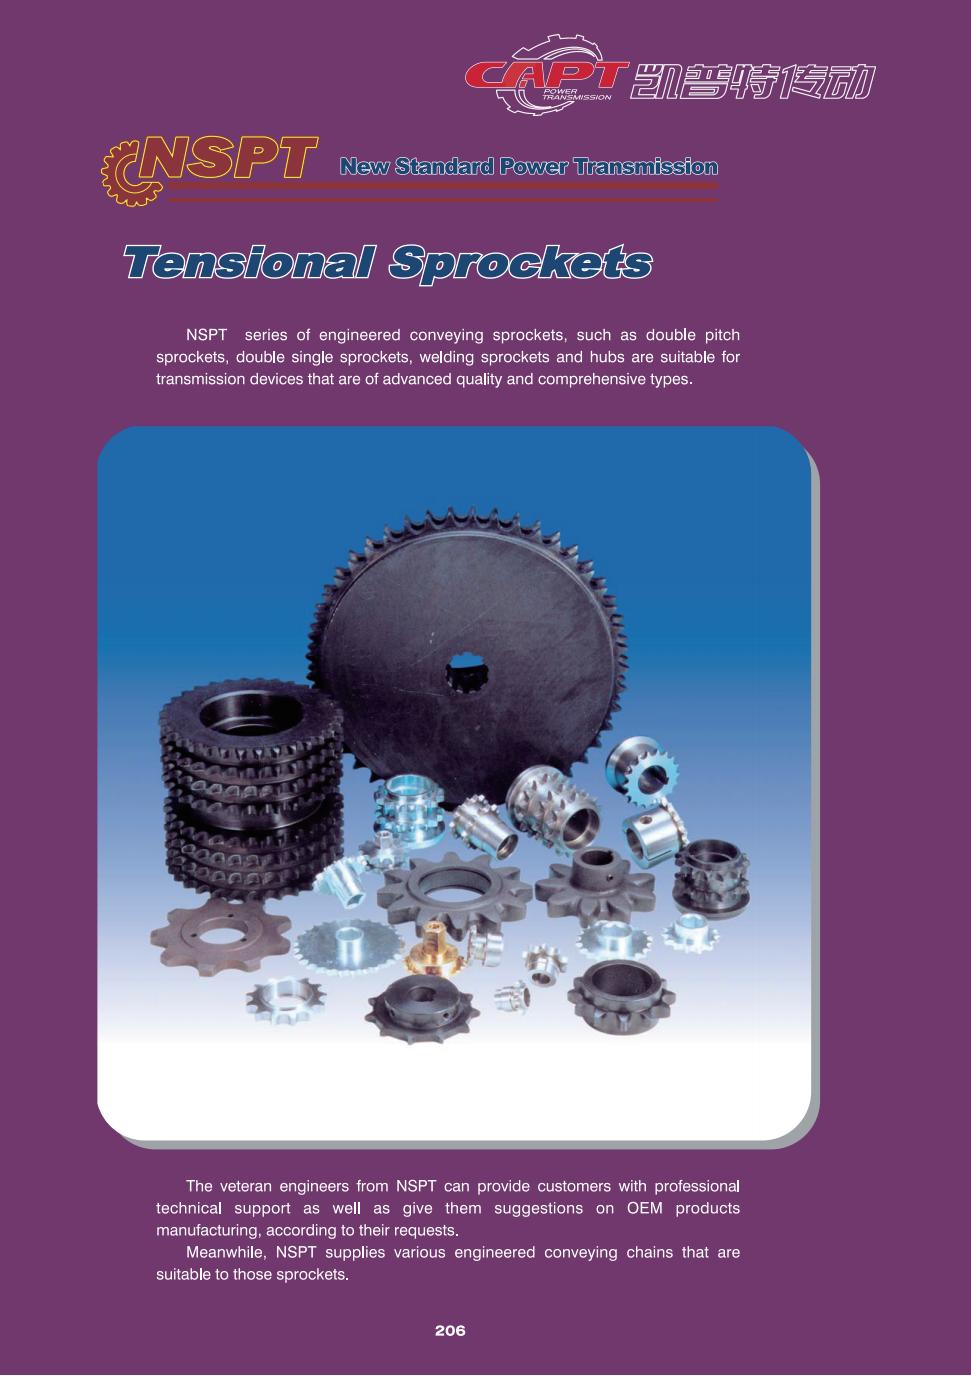 8-Tensional Sprockets